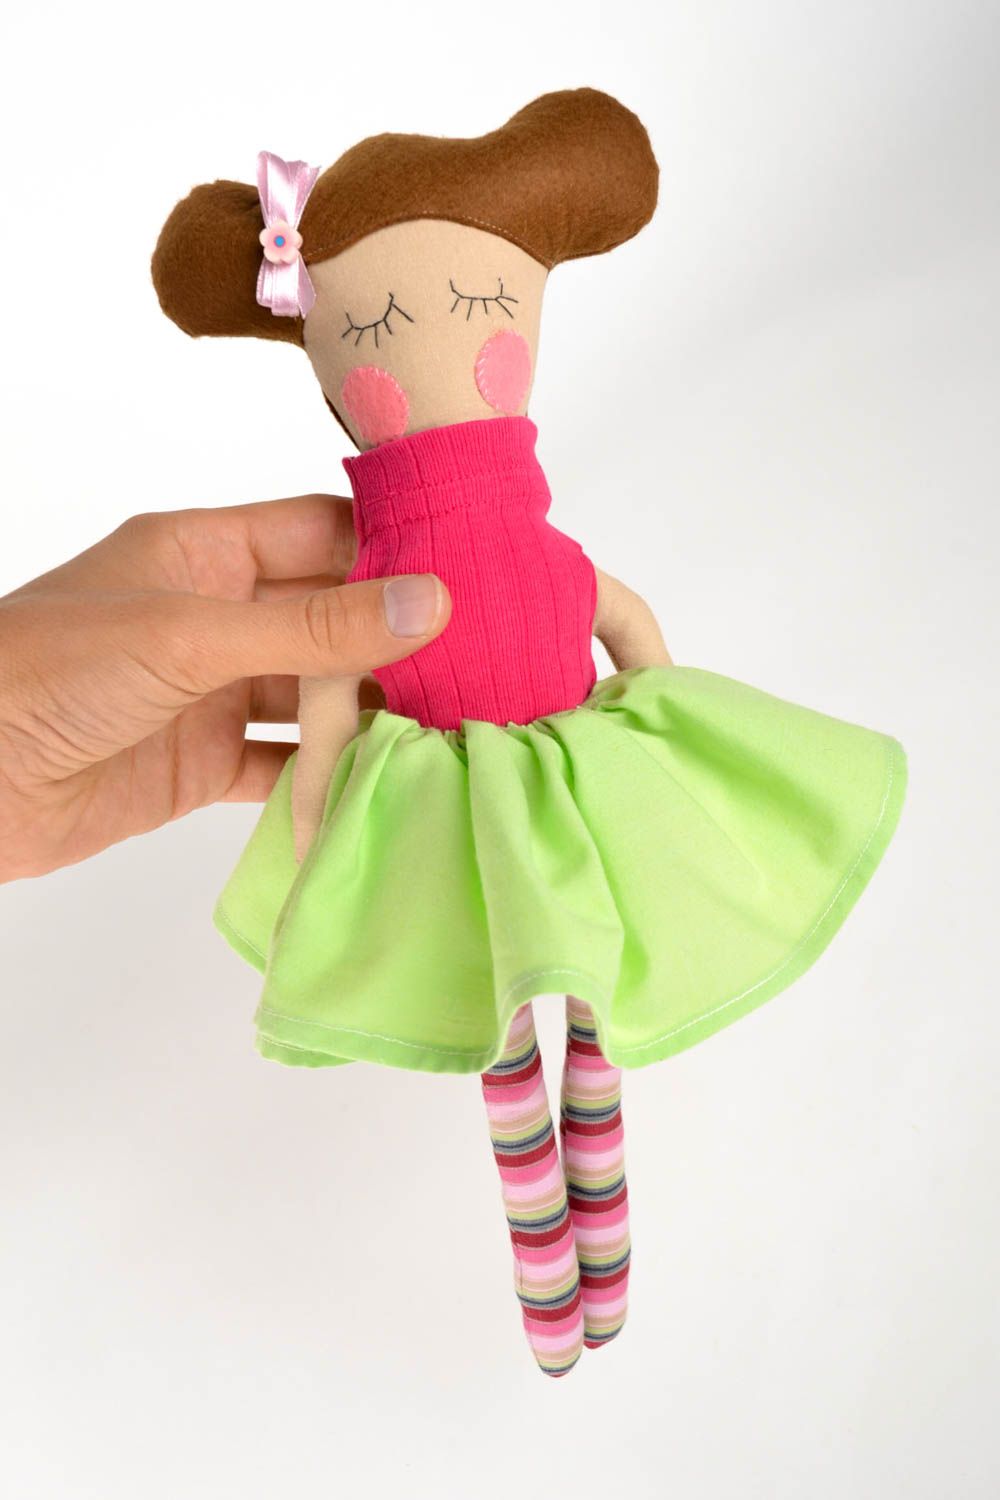 Handmade soft toy soft doll girl doll nursery decor unique toys gifts for girls photo 2